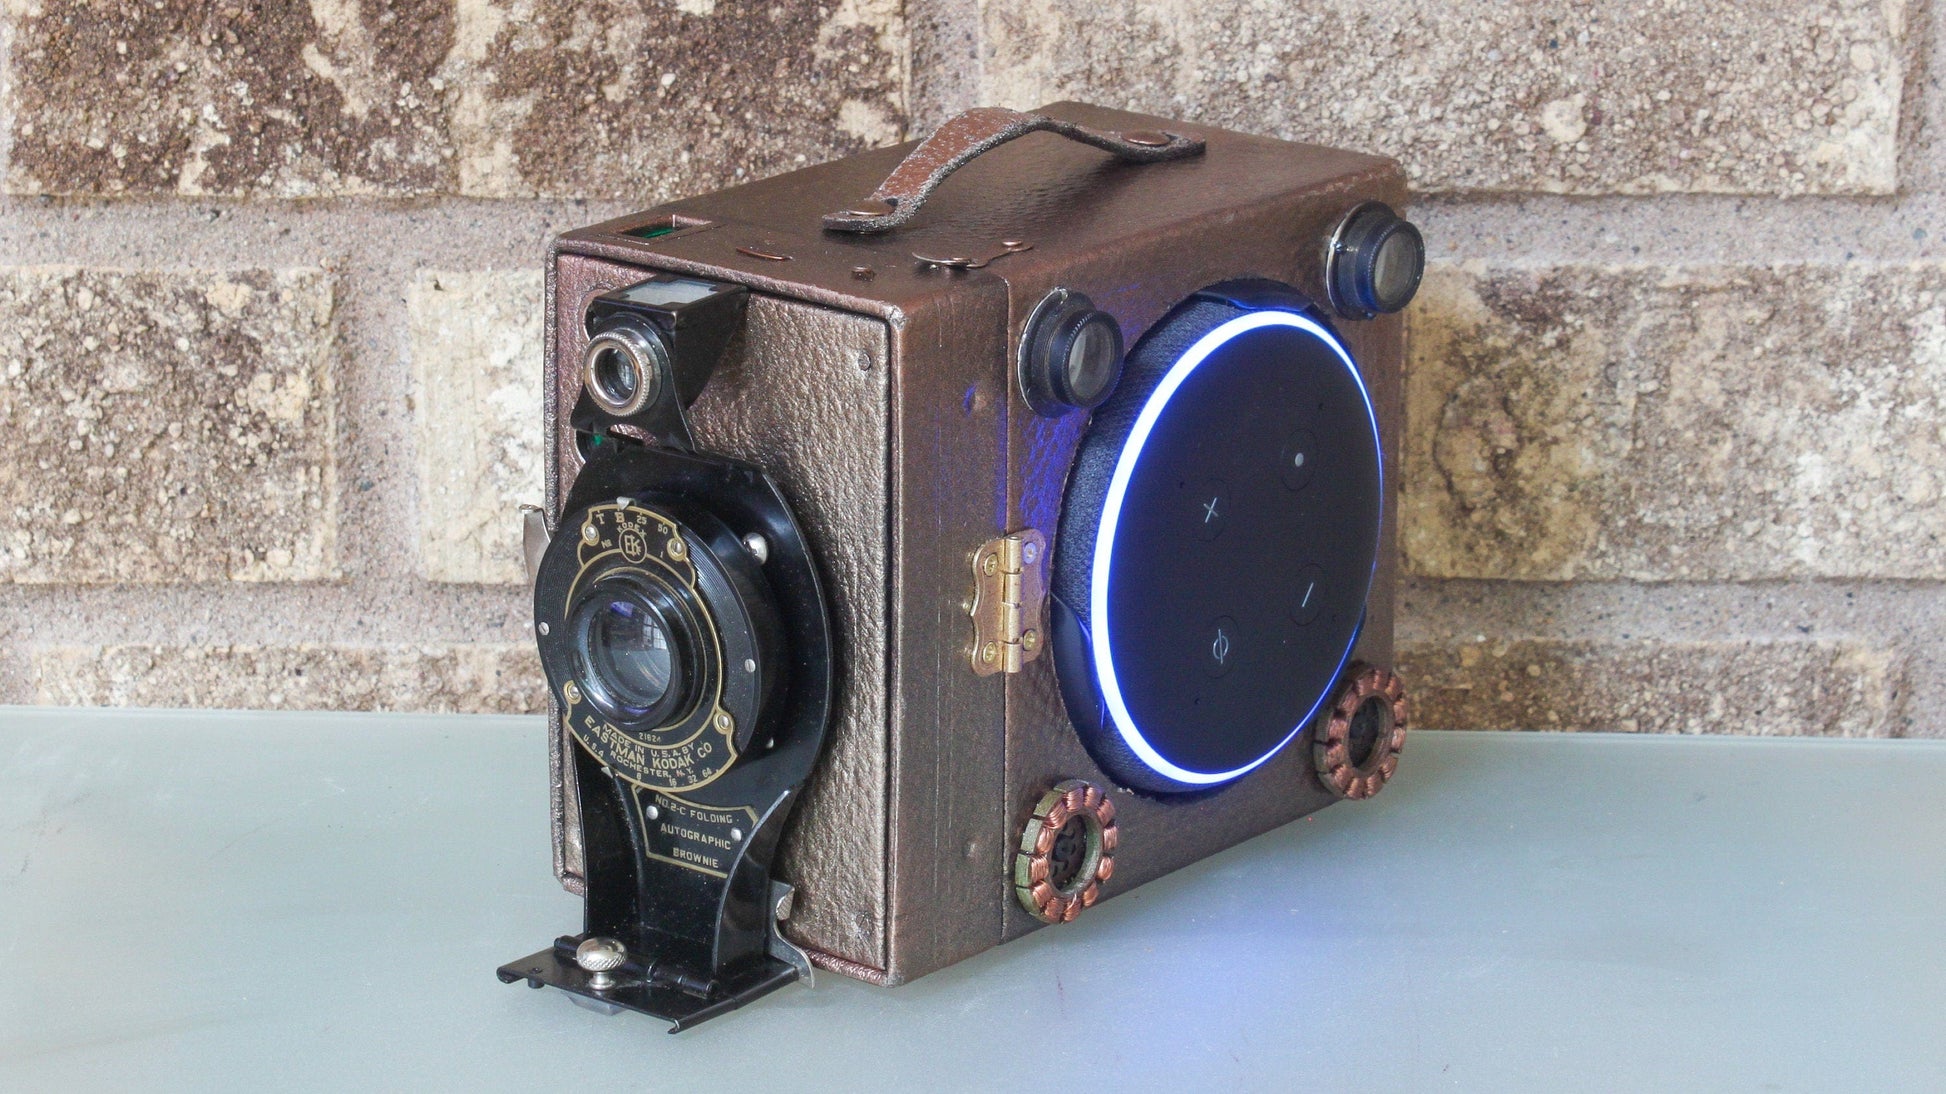 LightAndTimeArt Steampunk Speaker Steampunk Amazon 3rd Gen Echo Dot Holder/Stand, Gifts for Geeks, Electronic Audio gadget for him and her, signed & numbered artwork